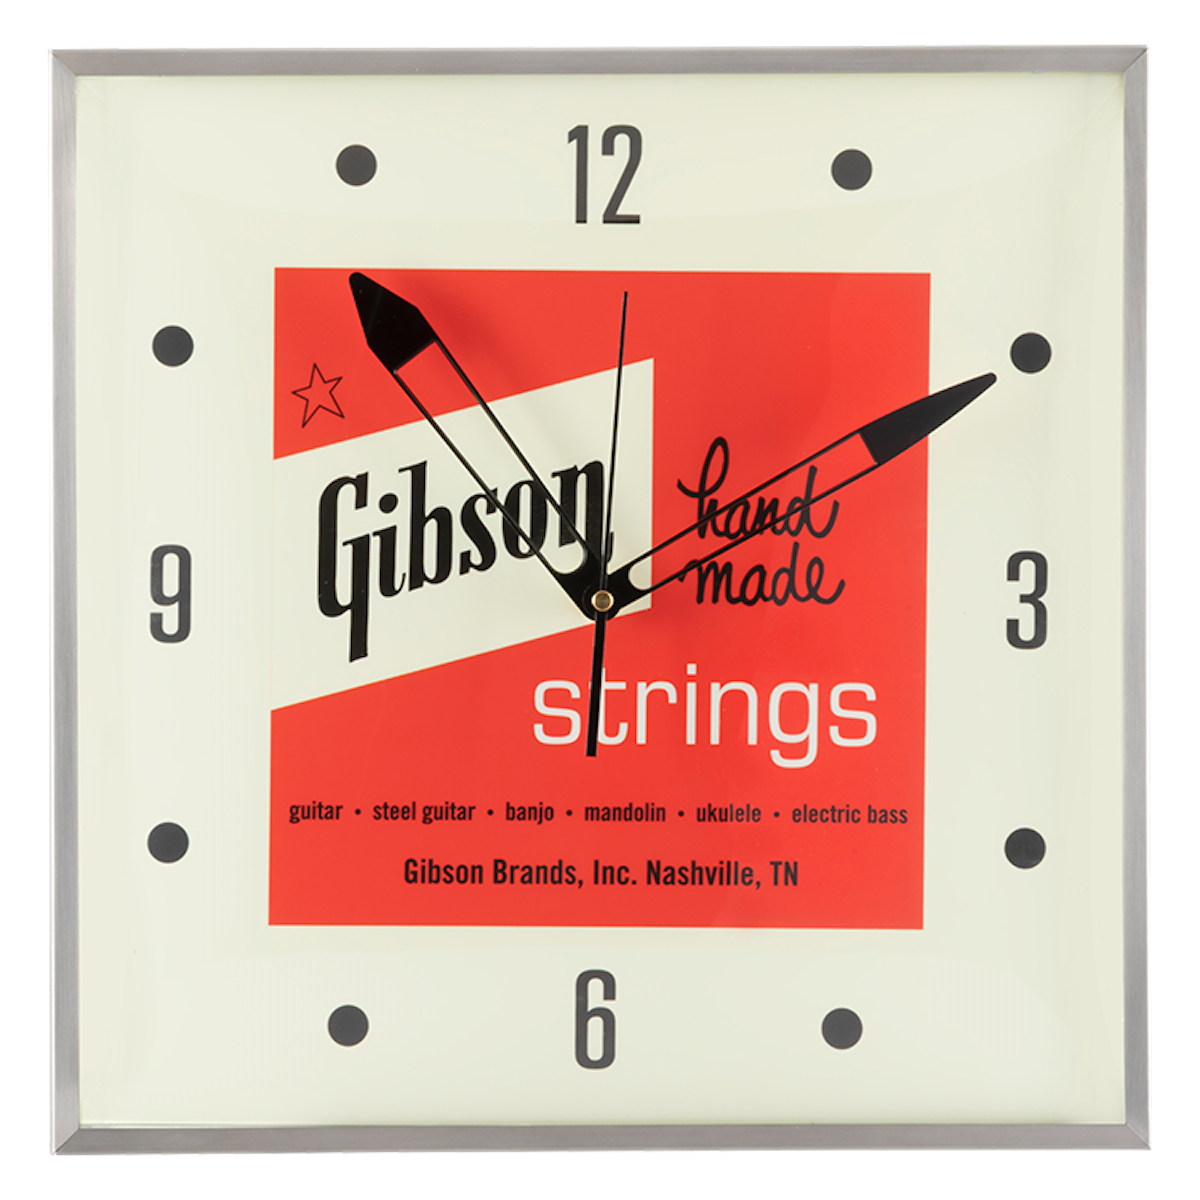 Gibson Vintage Lighted Wall Clock, Handmade Strings Sign